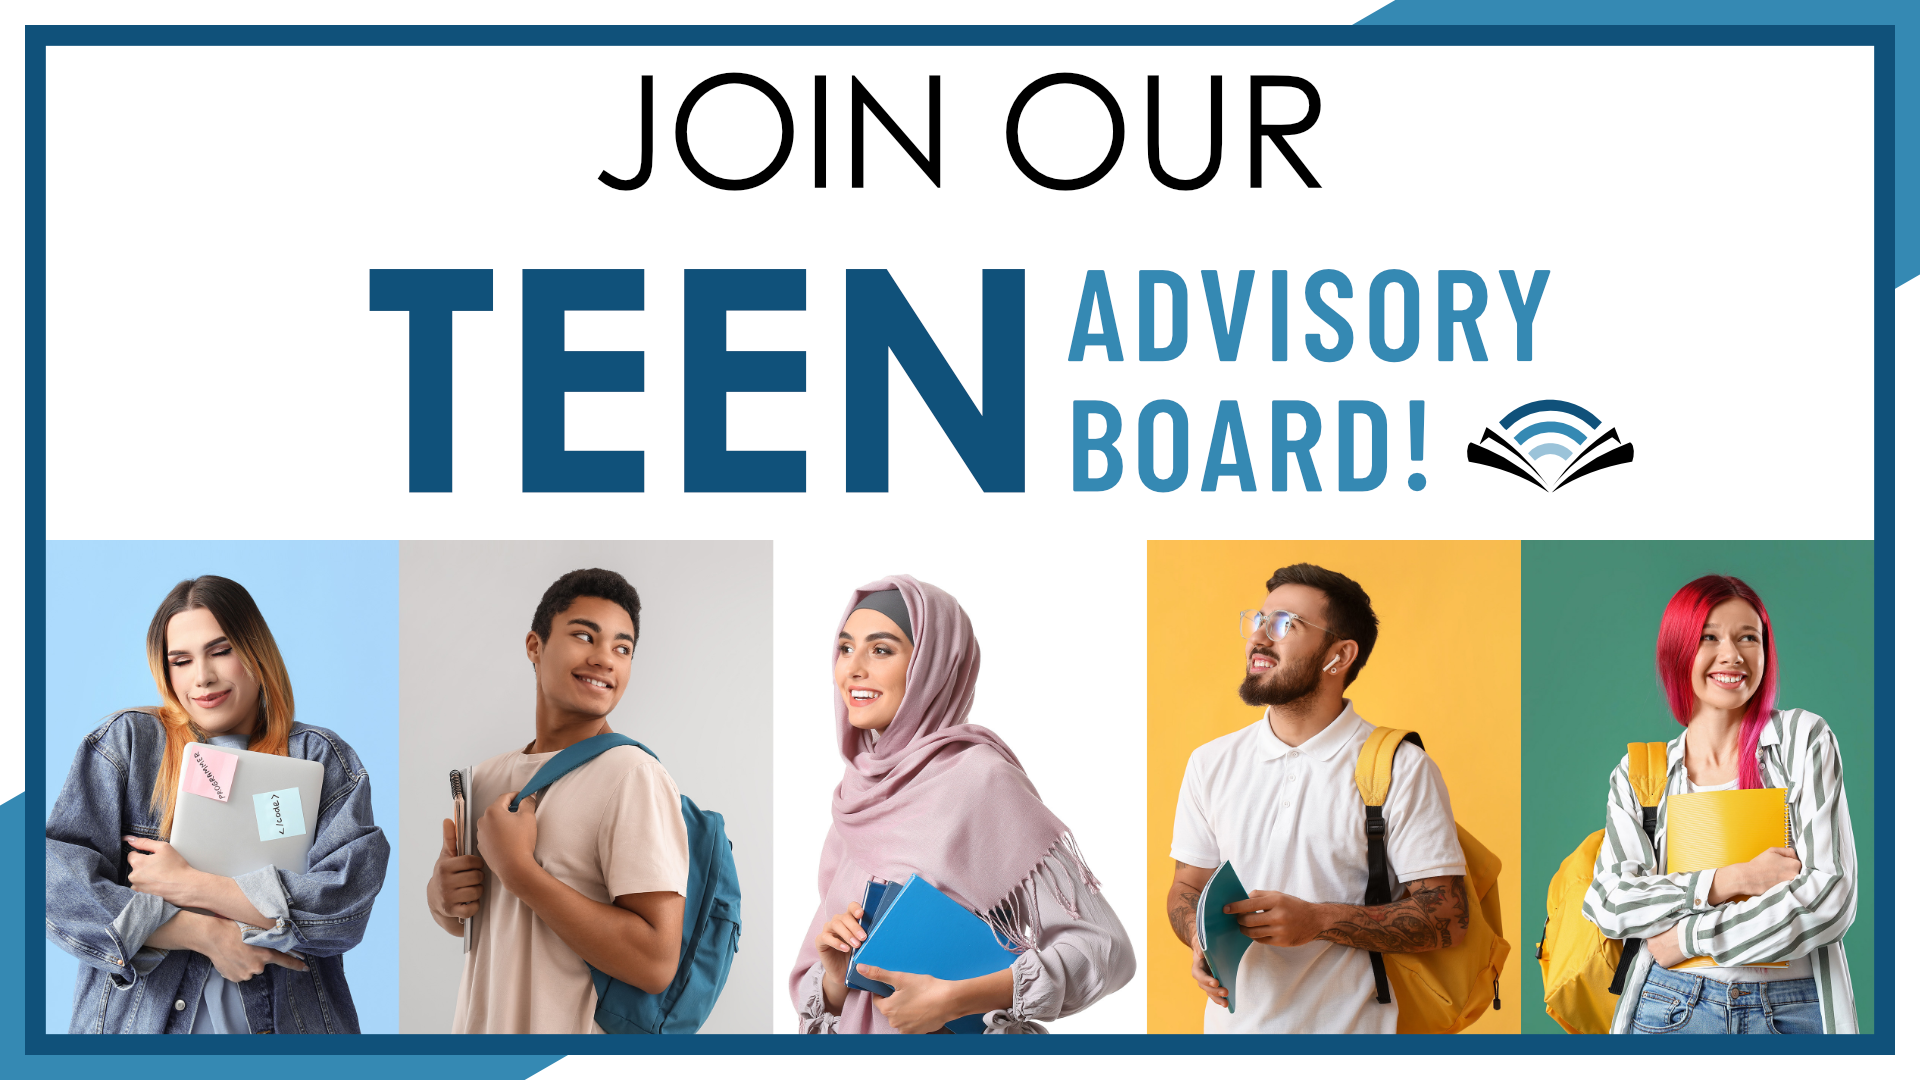 Teen Advisory Board, monthly meeting dates vary, intended for grades 6-12